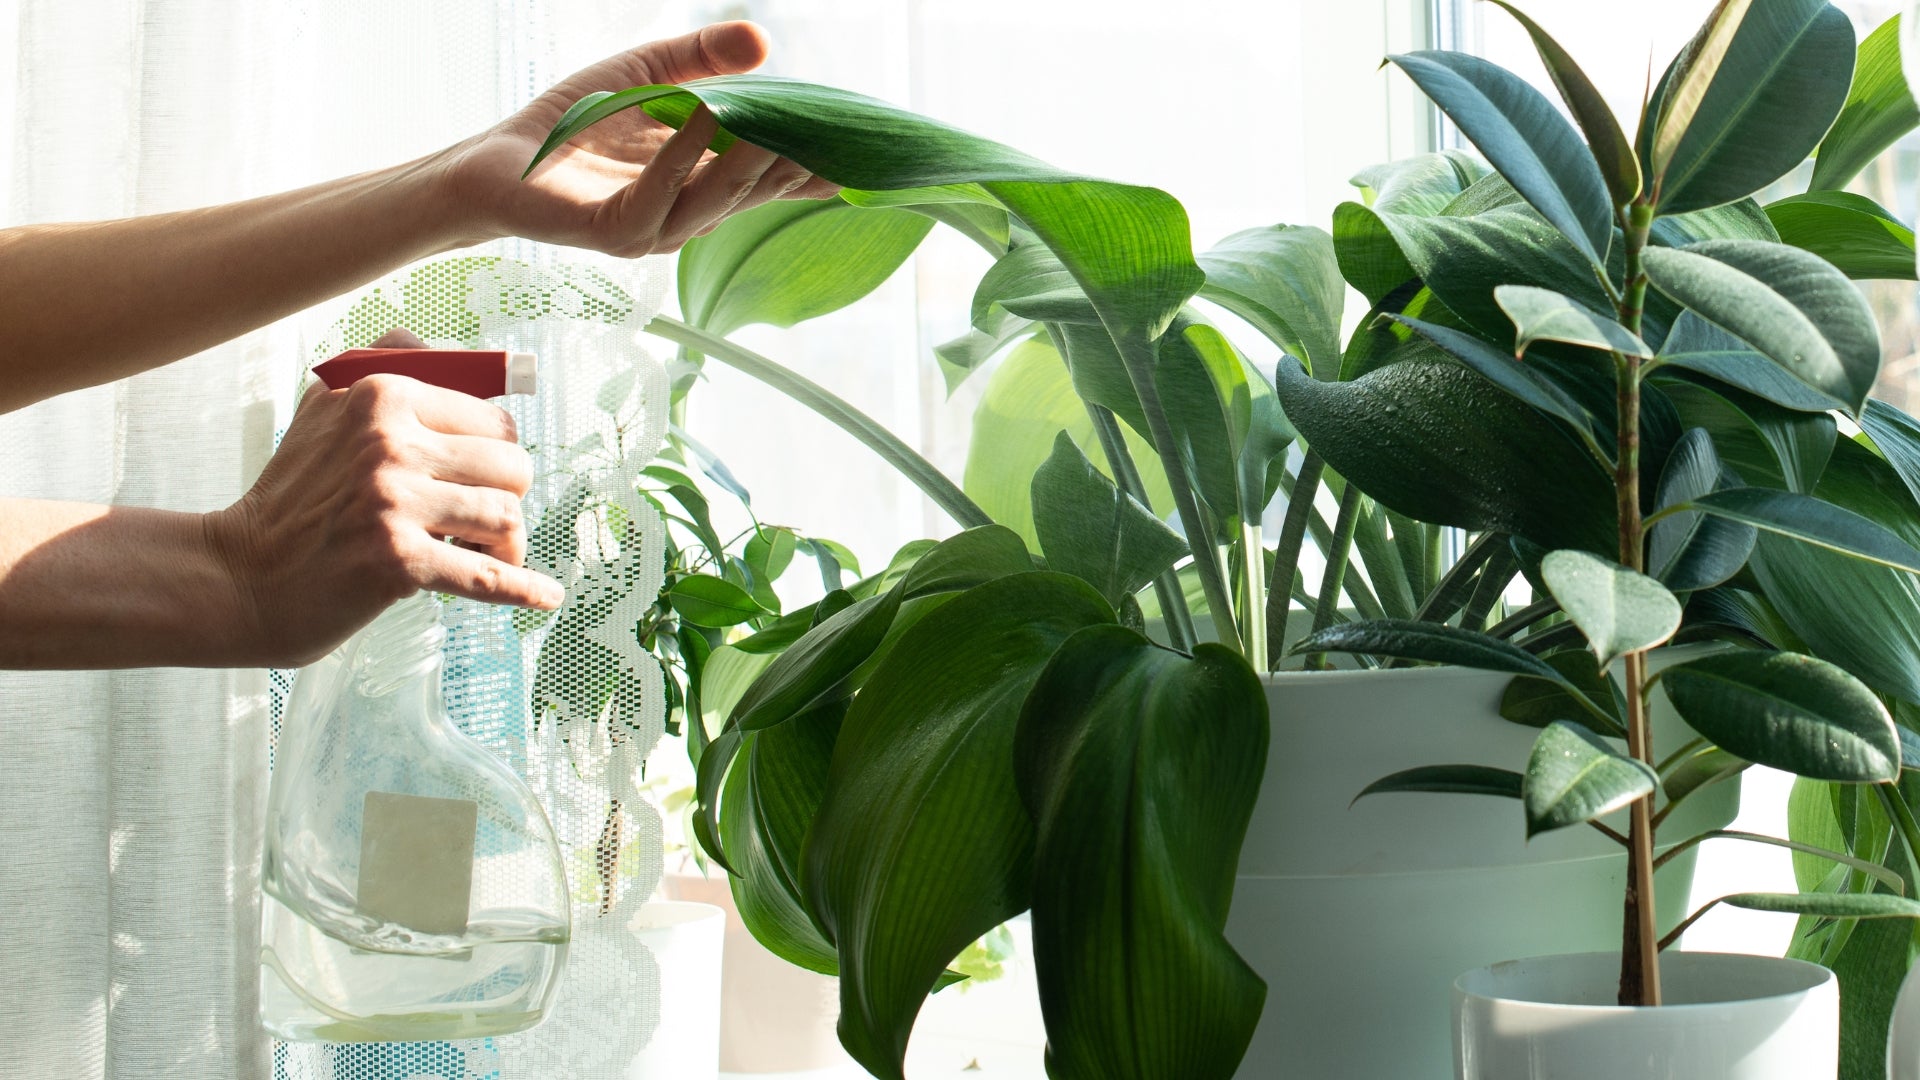 Hands spraying an indoor house plant with water